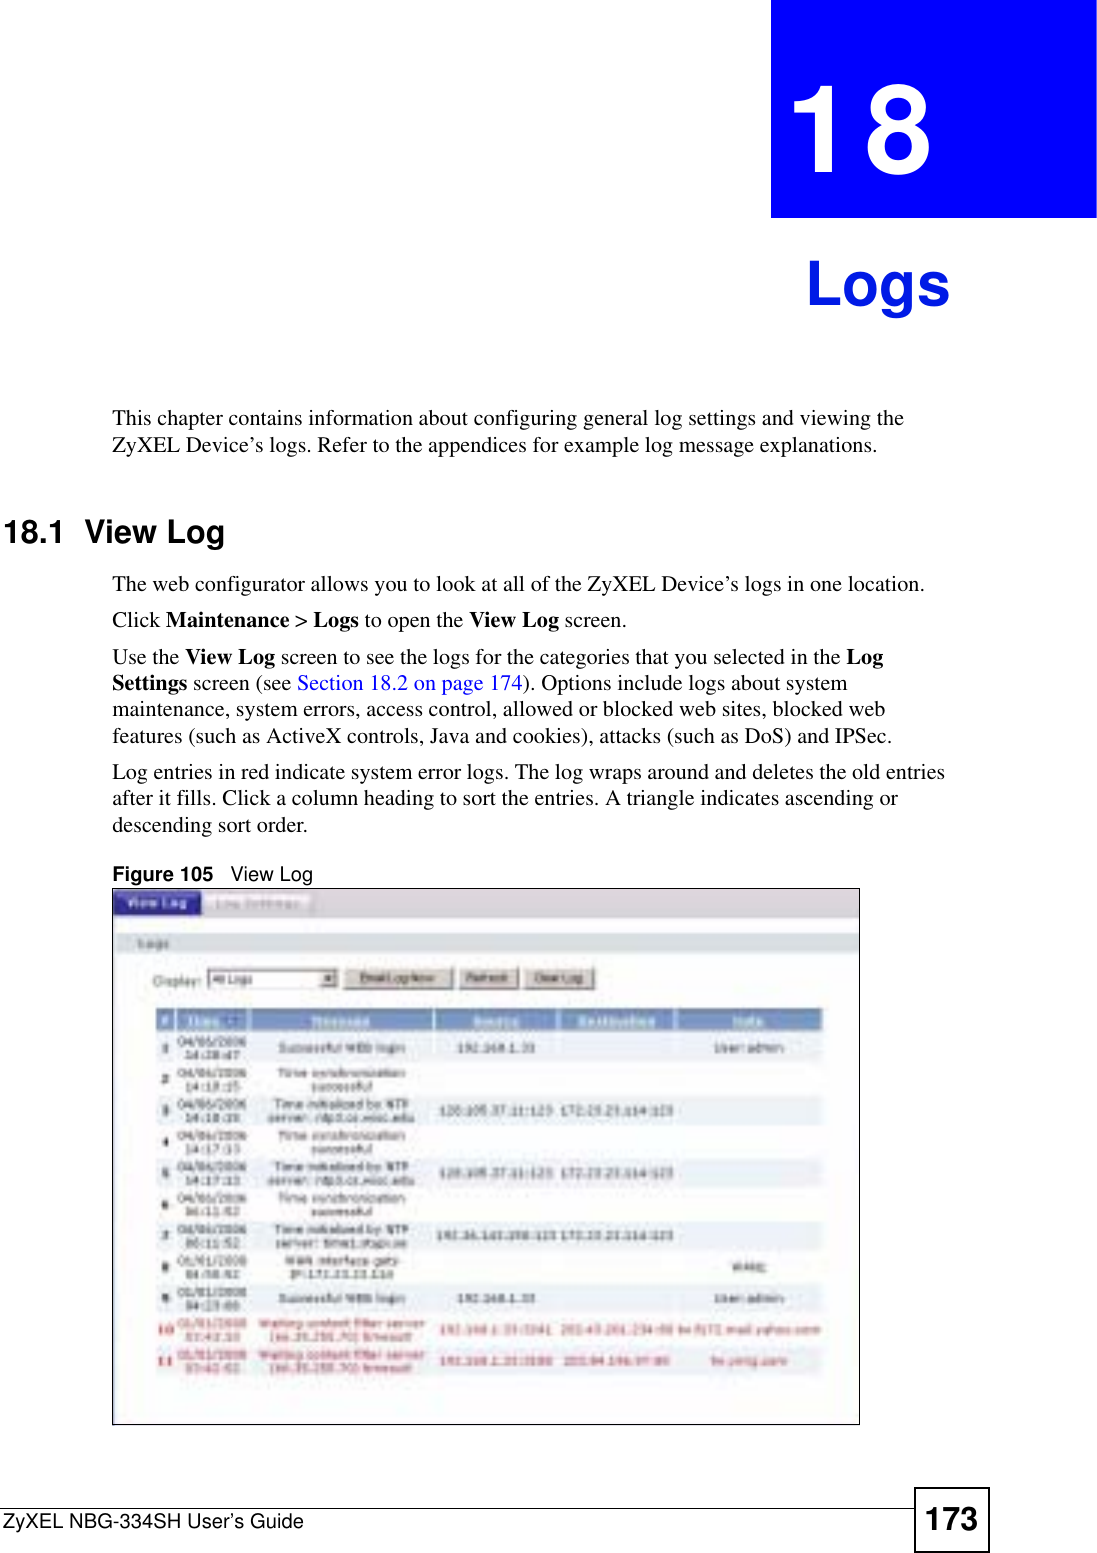 ZyXEL NBG-334SH User’s Guide 173CHAPTER 18LogsThis chapter contains information about configuring general log settings and viewing the ZyXEL Device’s logs. Refer to the appendices for example log message explanations.18.1  View Log The web configurator allows you to look at all of the ZyXEL Device’s logs in one location. Click Maintenance &gt; Logs to open the View Log screen. Use the View Log screen to see the logs for the categories that you selected in the LogSettings screen (see Section 18.2 on page 174). Options include logs about system maintenance, system errors, access control, allowed or blocked web sites, blocked web features (such as ActiveX controls, Java and cookies), attacks (such as DoS) and IPSec.Log entries in red indicate system error logs. The log wraps around and deletes the old entries after it fills. Click a column heading to sort the entries. A triangle indicates ascending or descending sort order. Figure 105   View Log